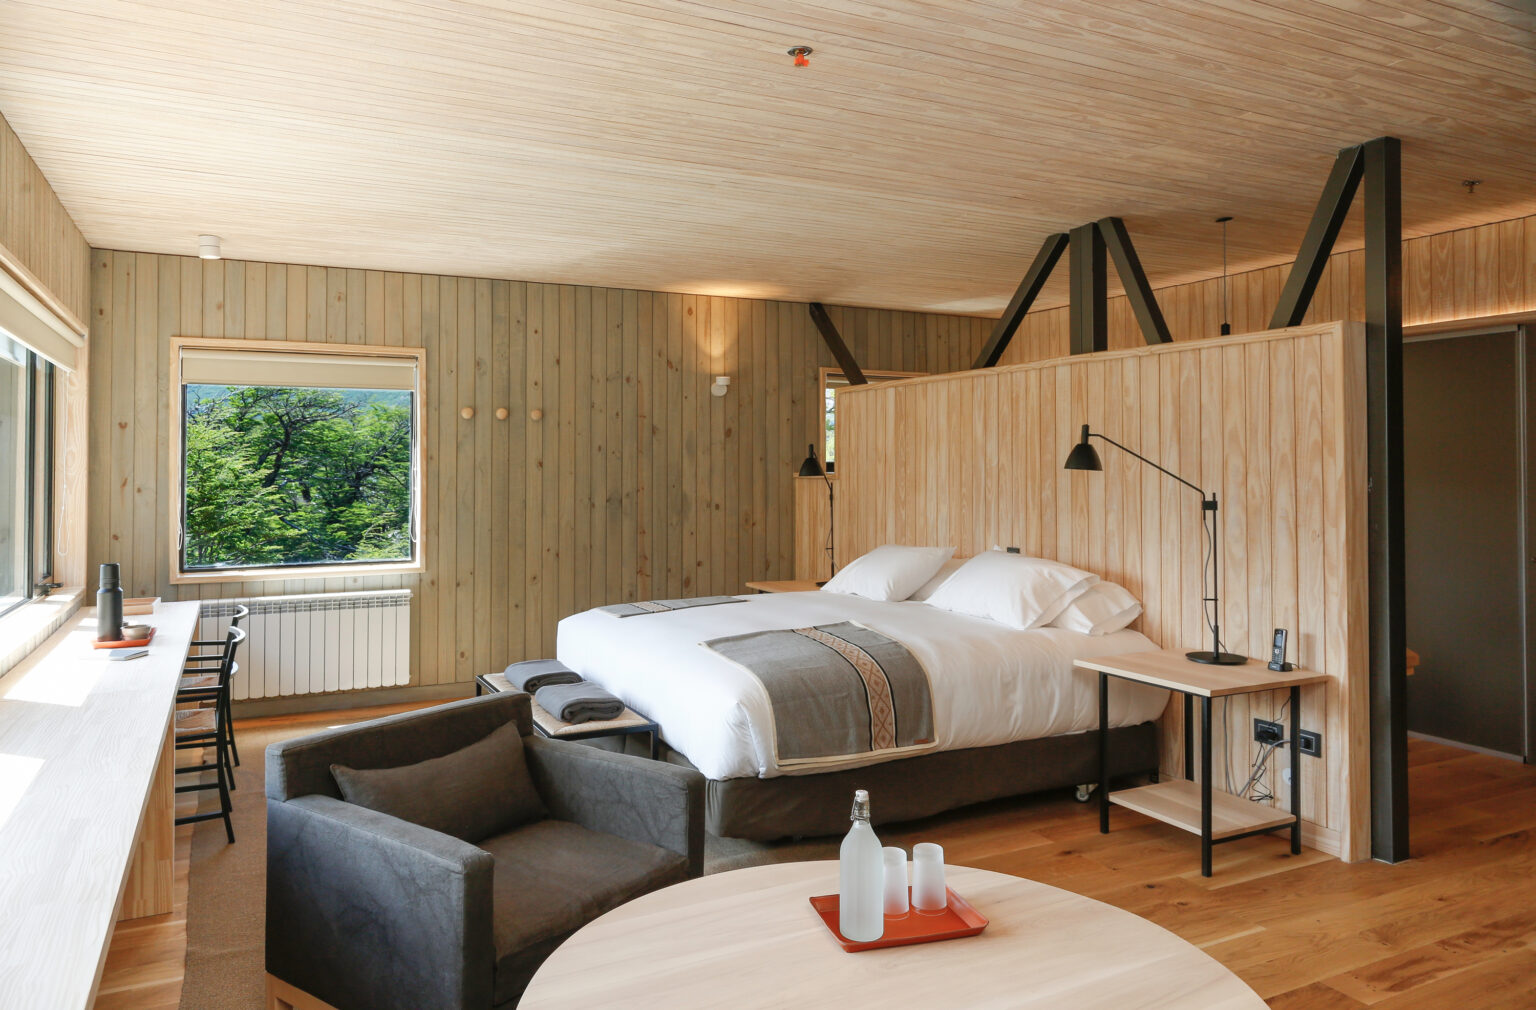 Bed in room with wooden walls